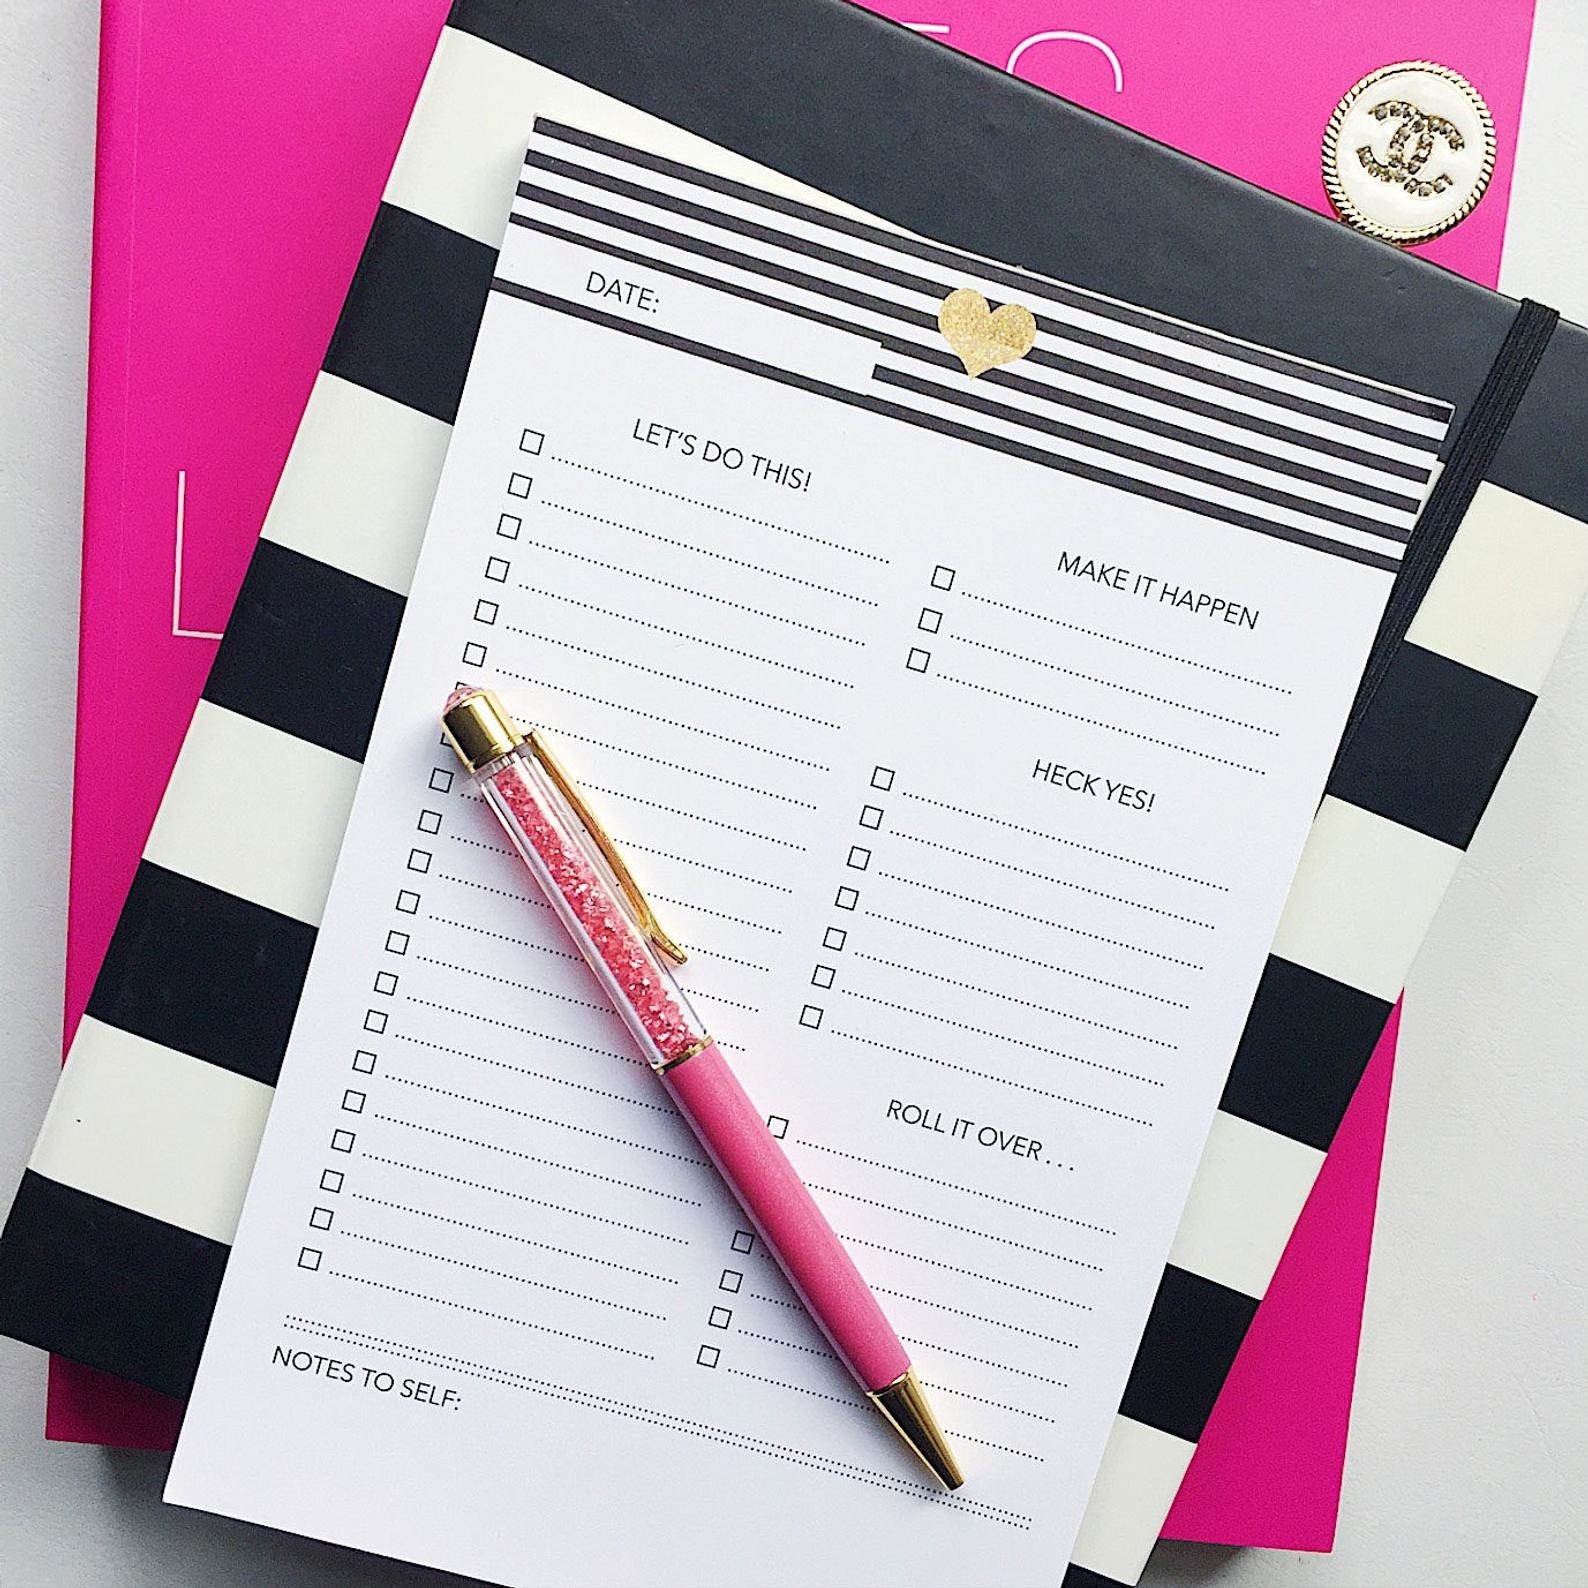 The planner notepad